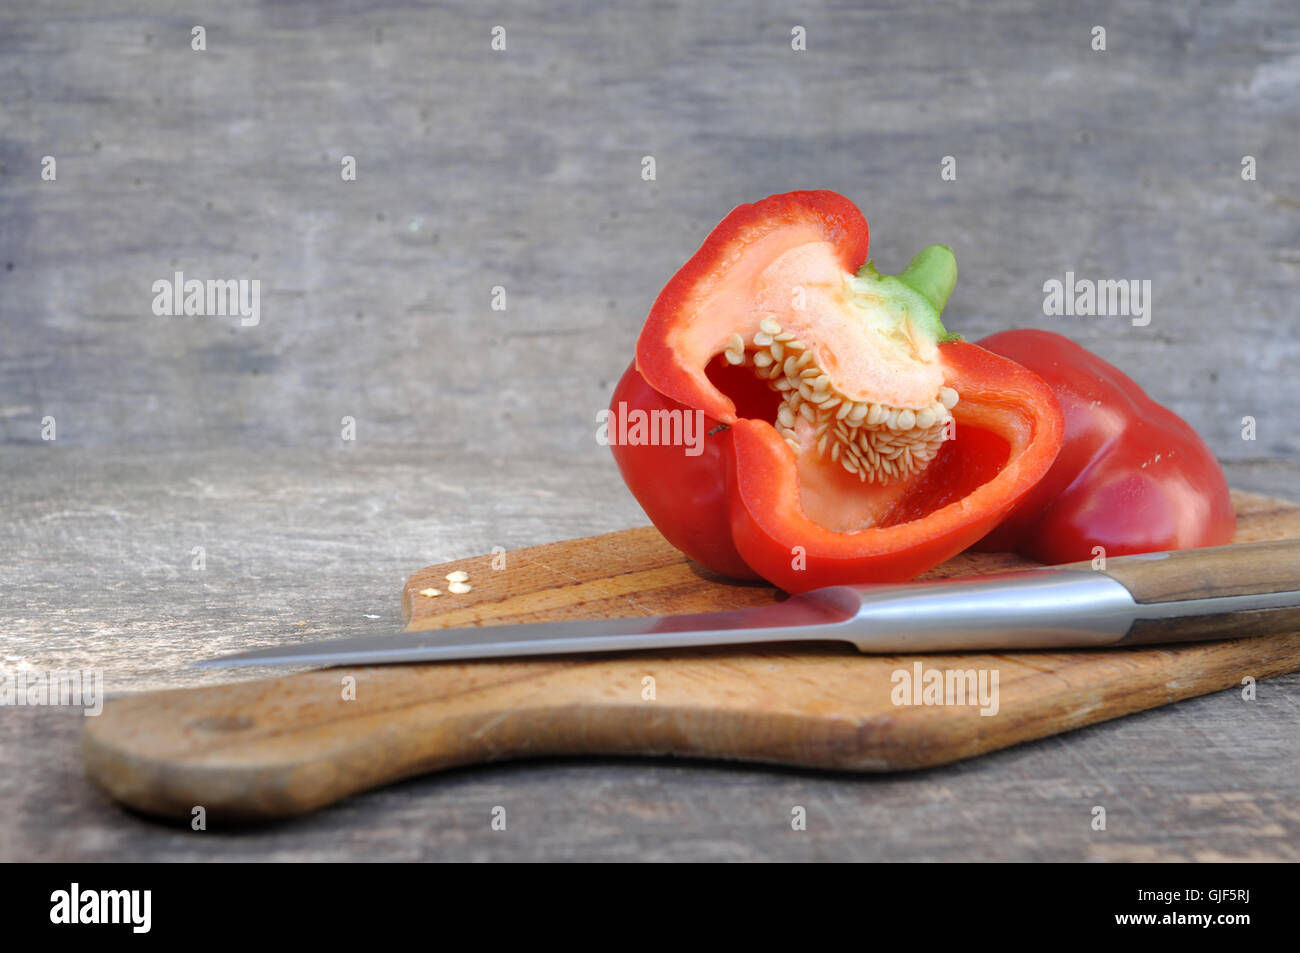 red pepper cut in half on board with knife Stock Photo